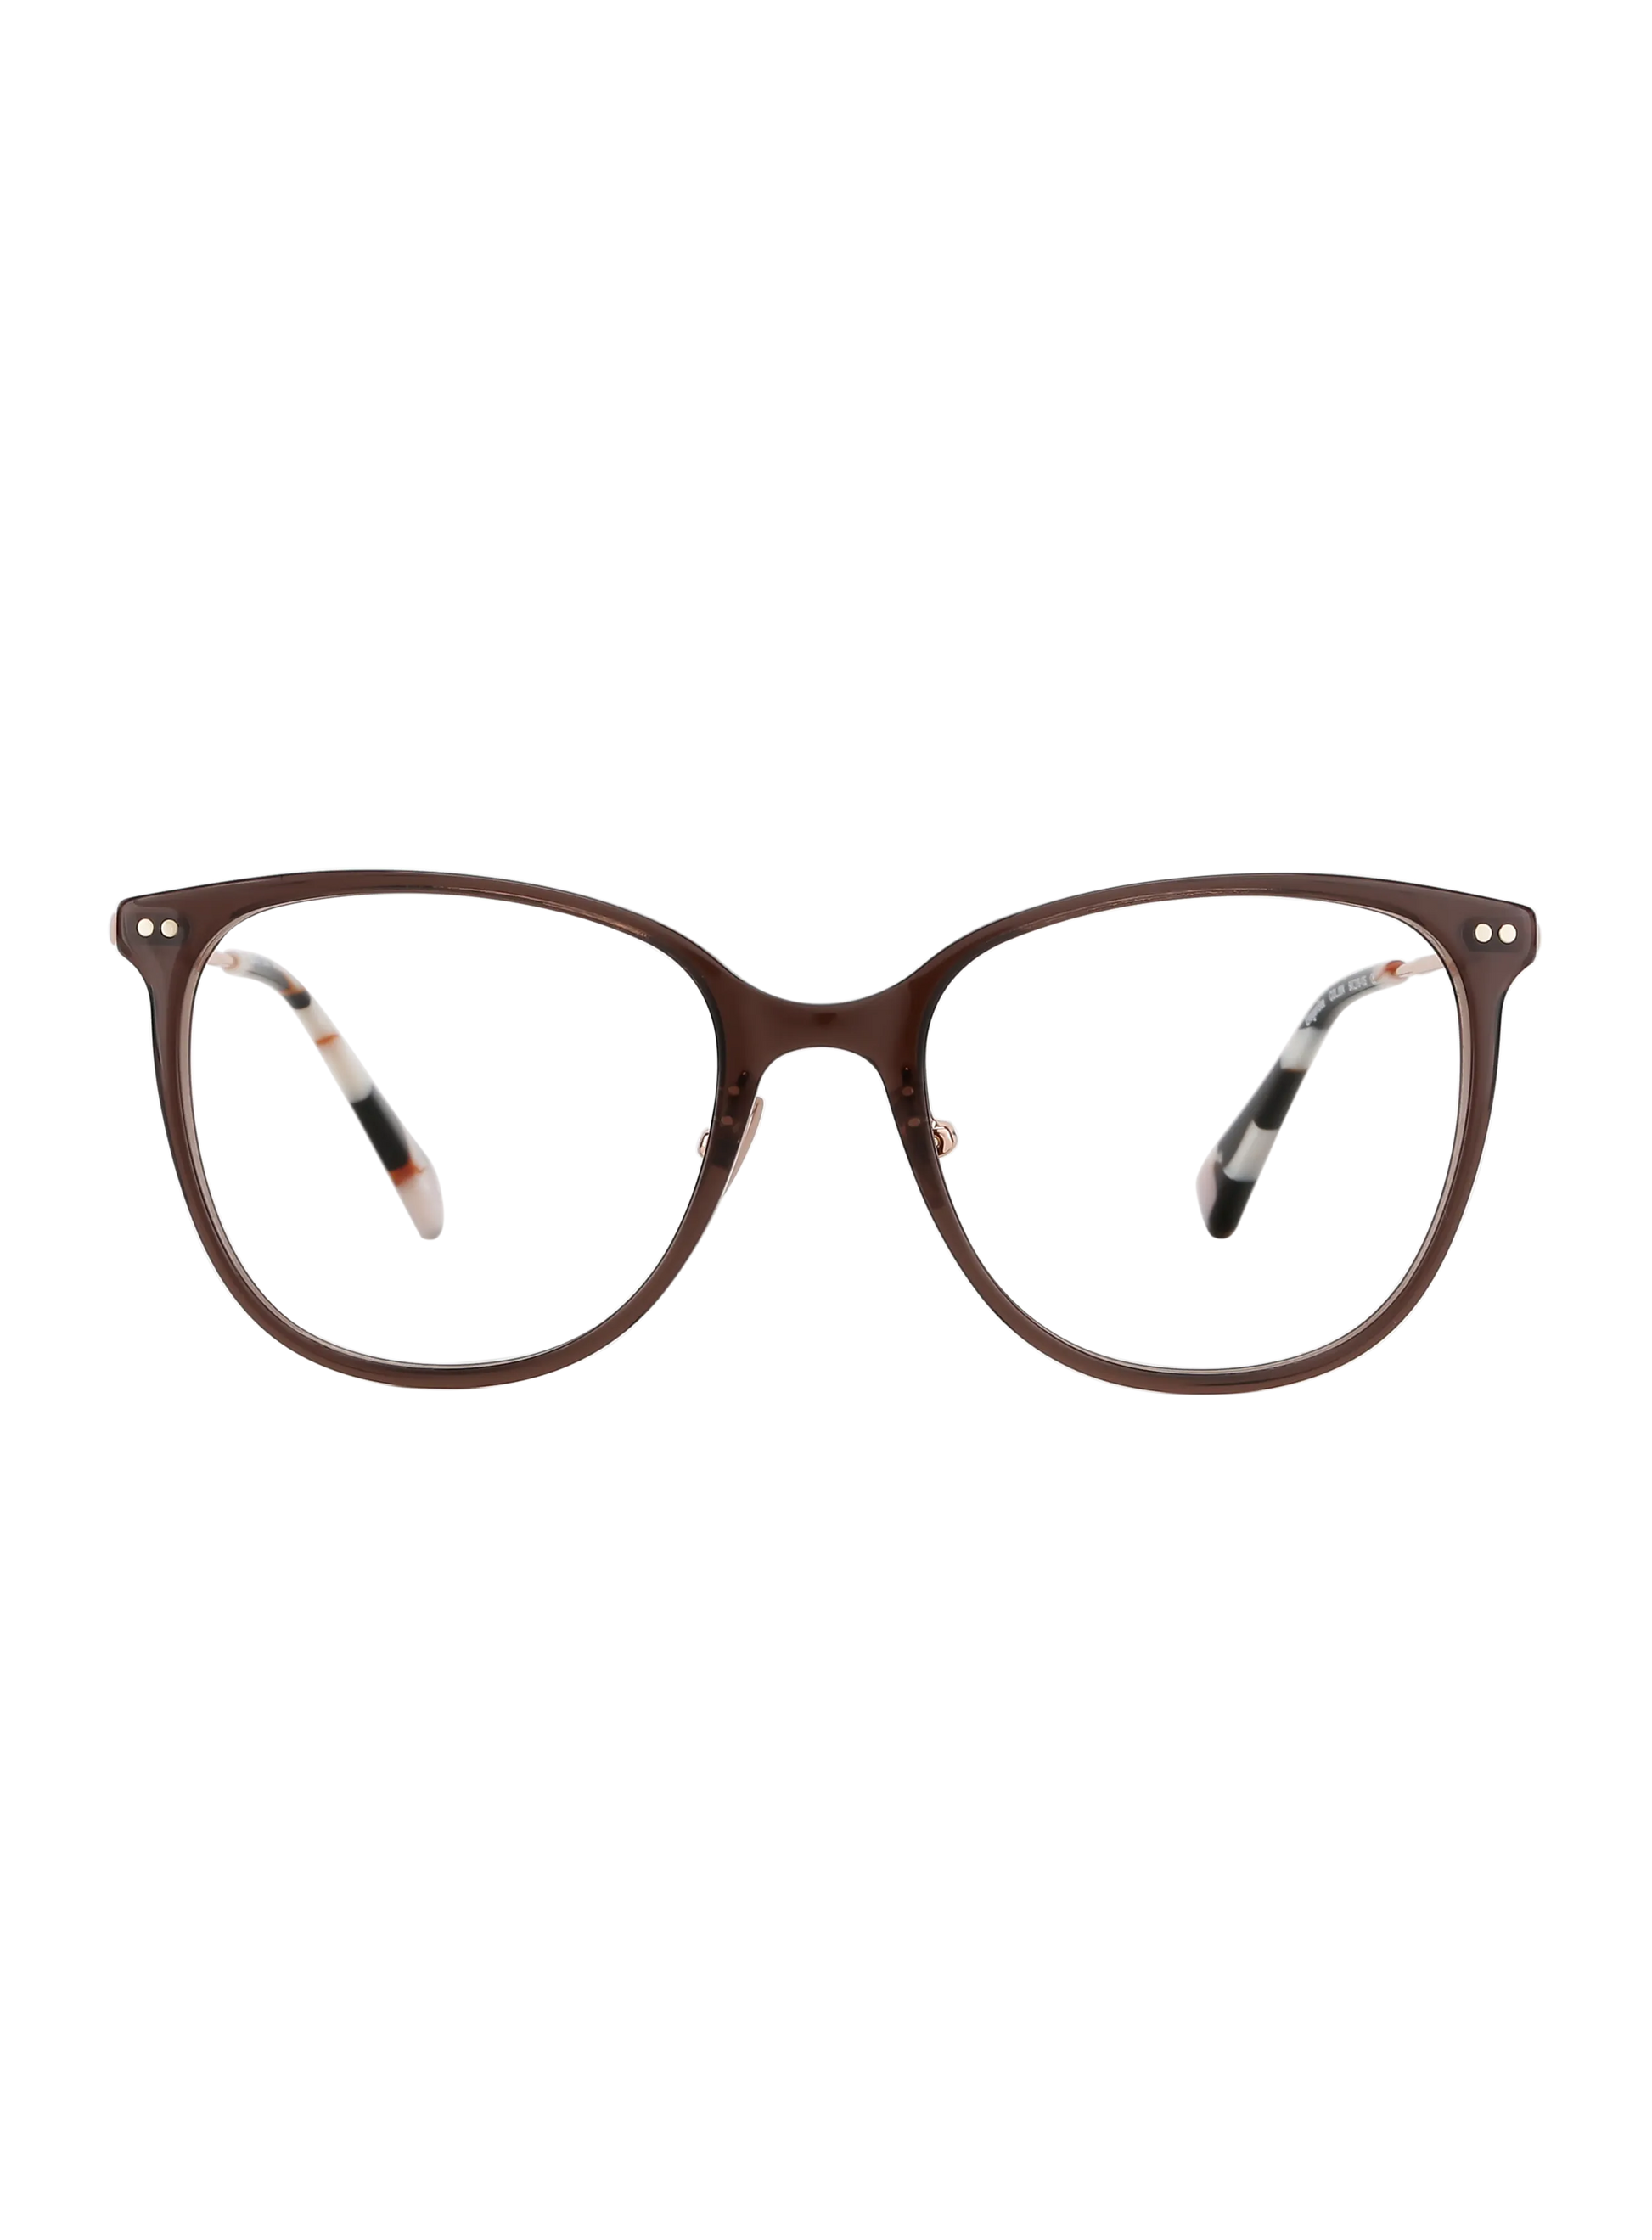 Farbe_clear brown rosegold 004